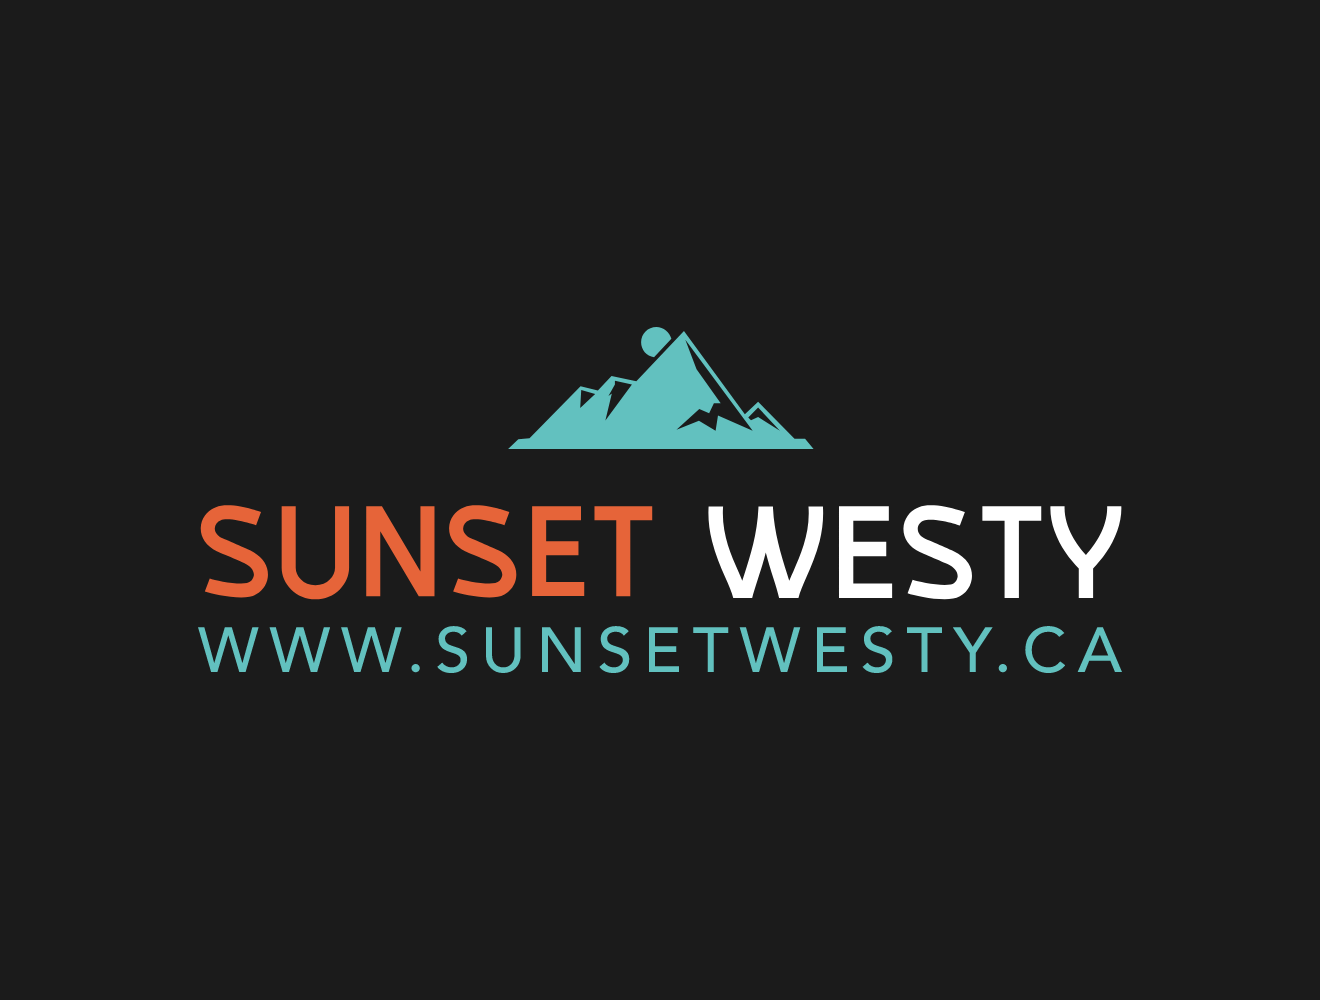 VALLEY WEST - SUNSET WESTY